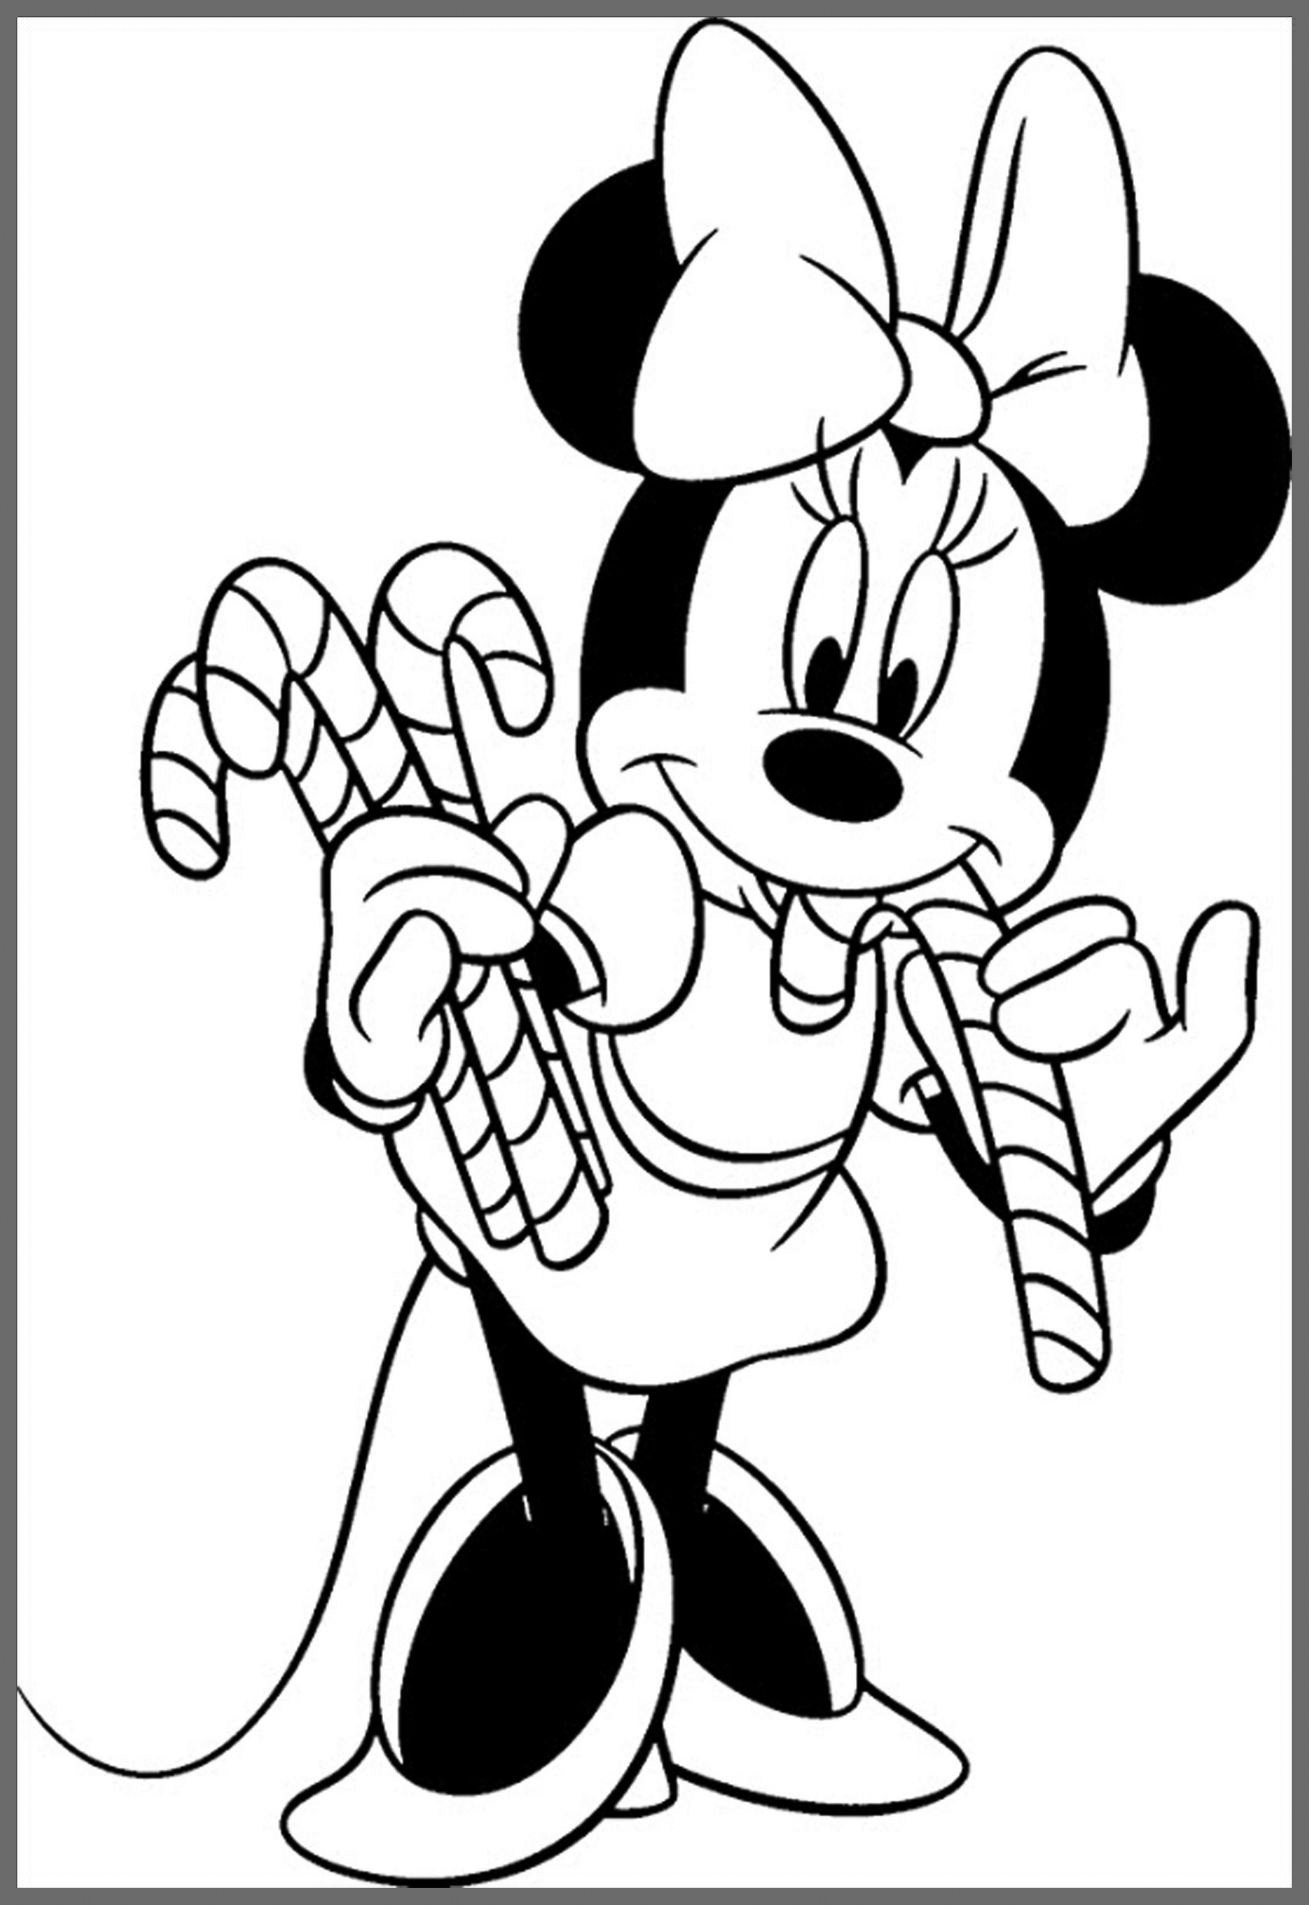 mickey-mouse-christmas-coloring-pages-kinosvalka